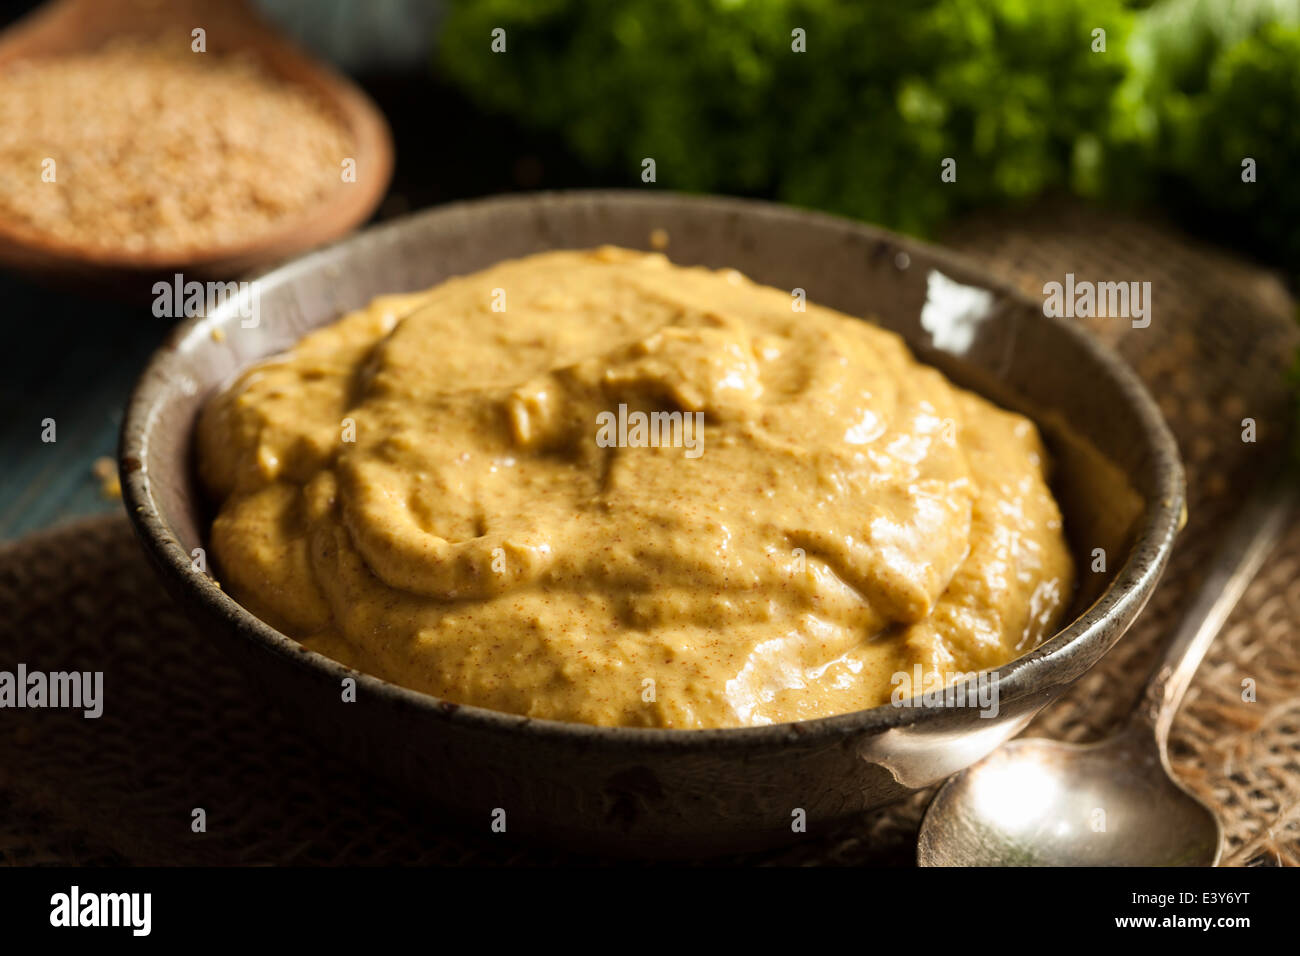 Homemade Spicy Mustard Sauce on a Background Stock Photo